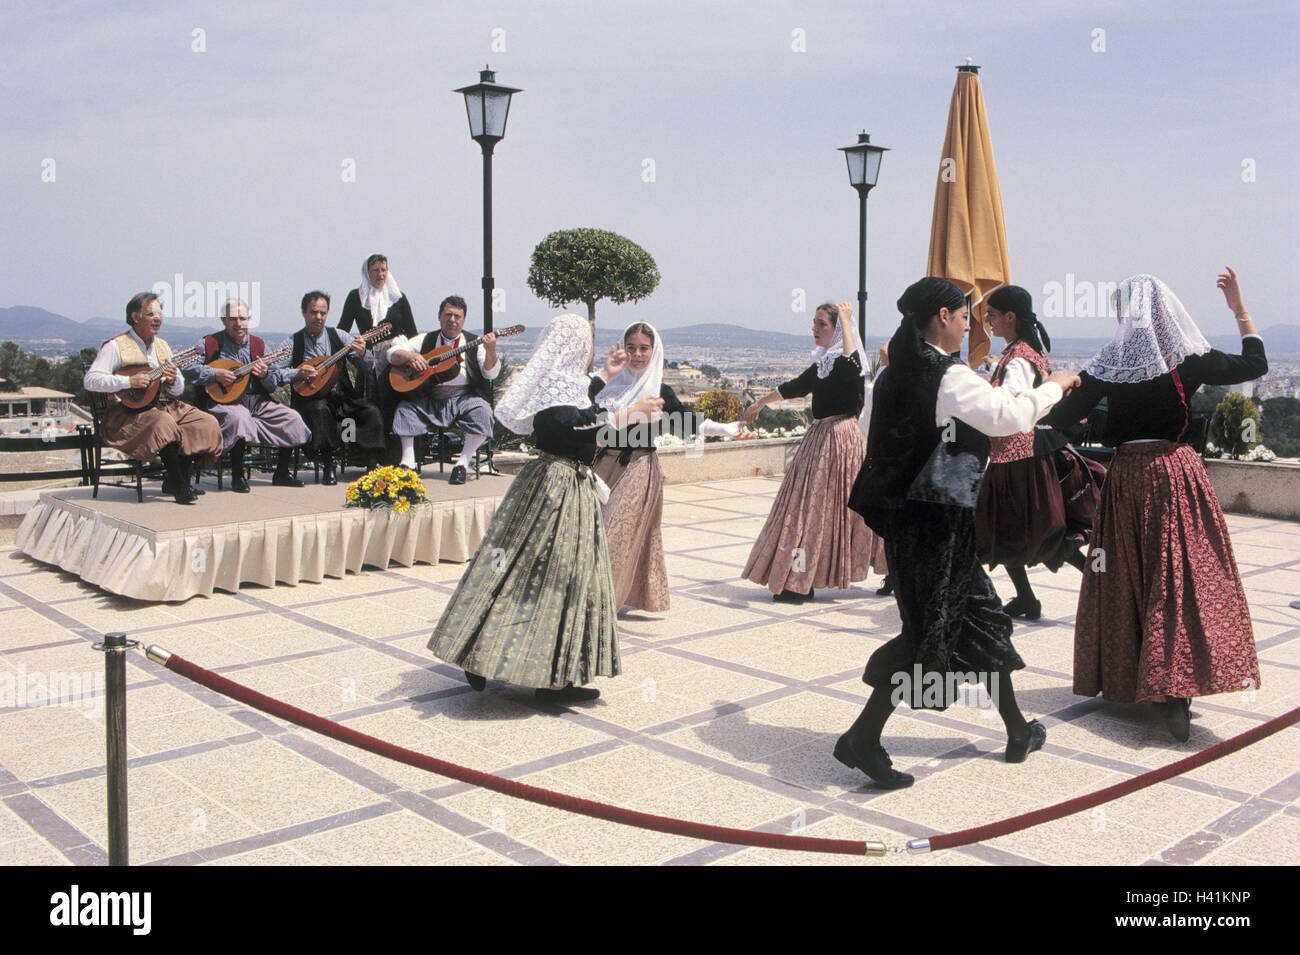 Spain, Majorca, hotel terrace, musician, folklore group, dance, no model release the Mediterranean Sea, the Balearic Islands, island, hotel, terrace, men, make music, dance compensating roller, folklore clothes, folklore, folklore evening, entertainment, Stock Photo